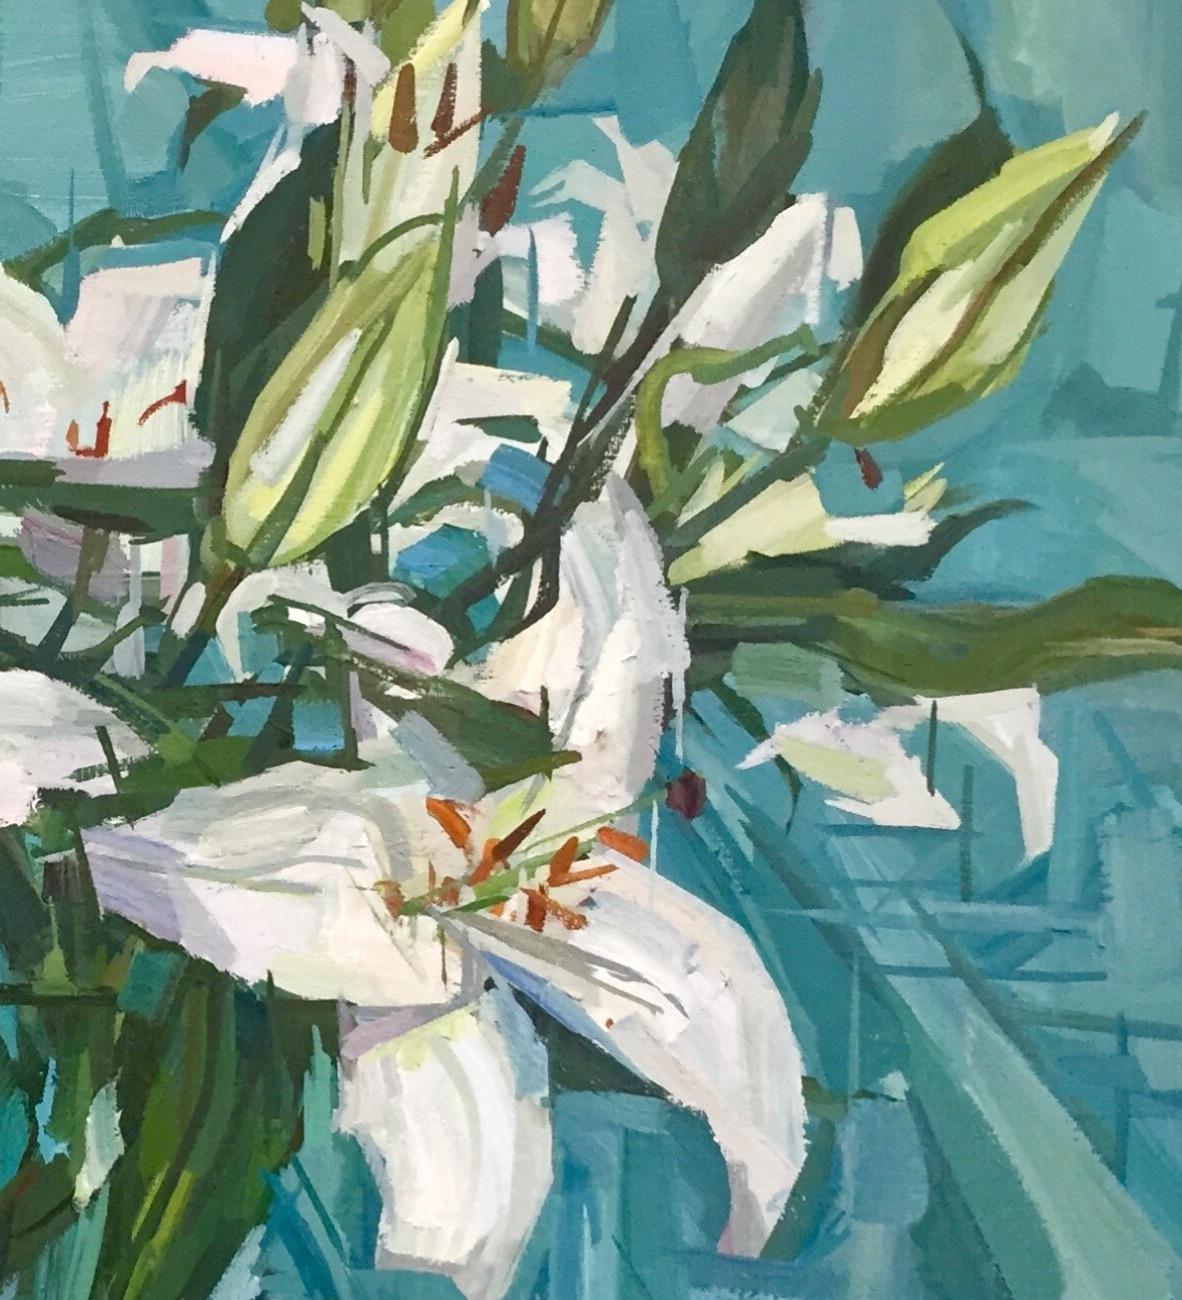 This still life painting of flowers arranged in a vase is from Francis Sills' newest series of Flora Paintings. The ivory petals and green leaves in the bouquet of white lilies are beautifully complemented by the vibrant, teal blue background. This